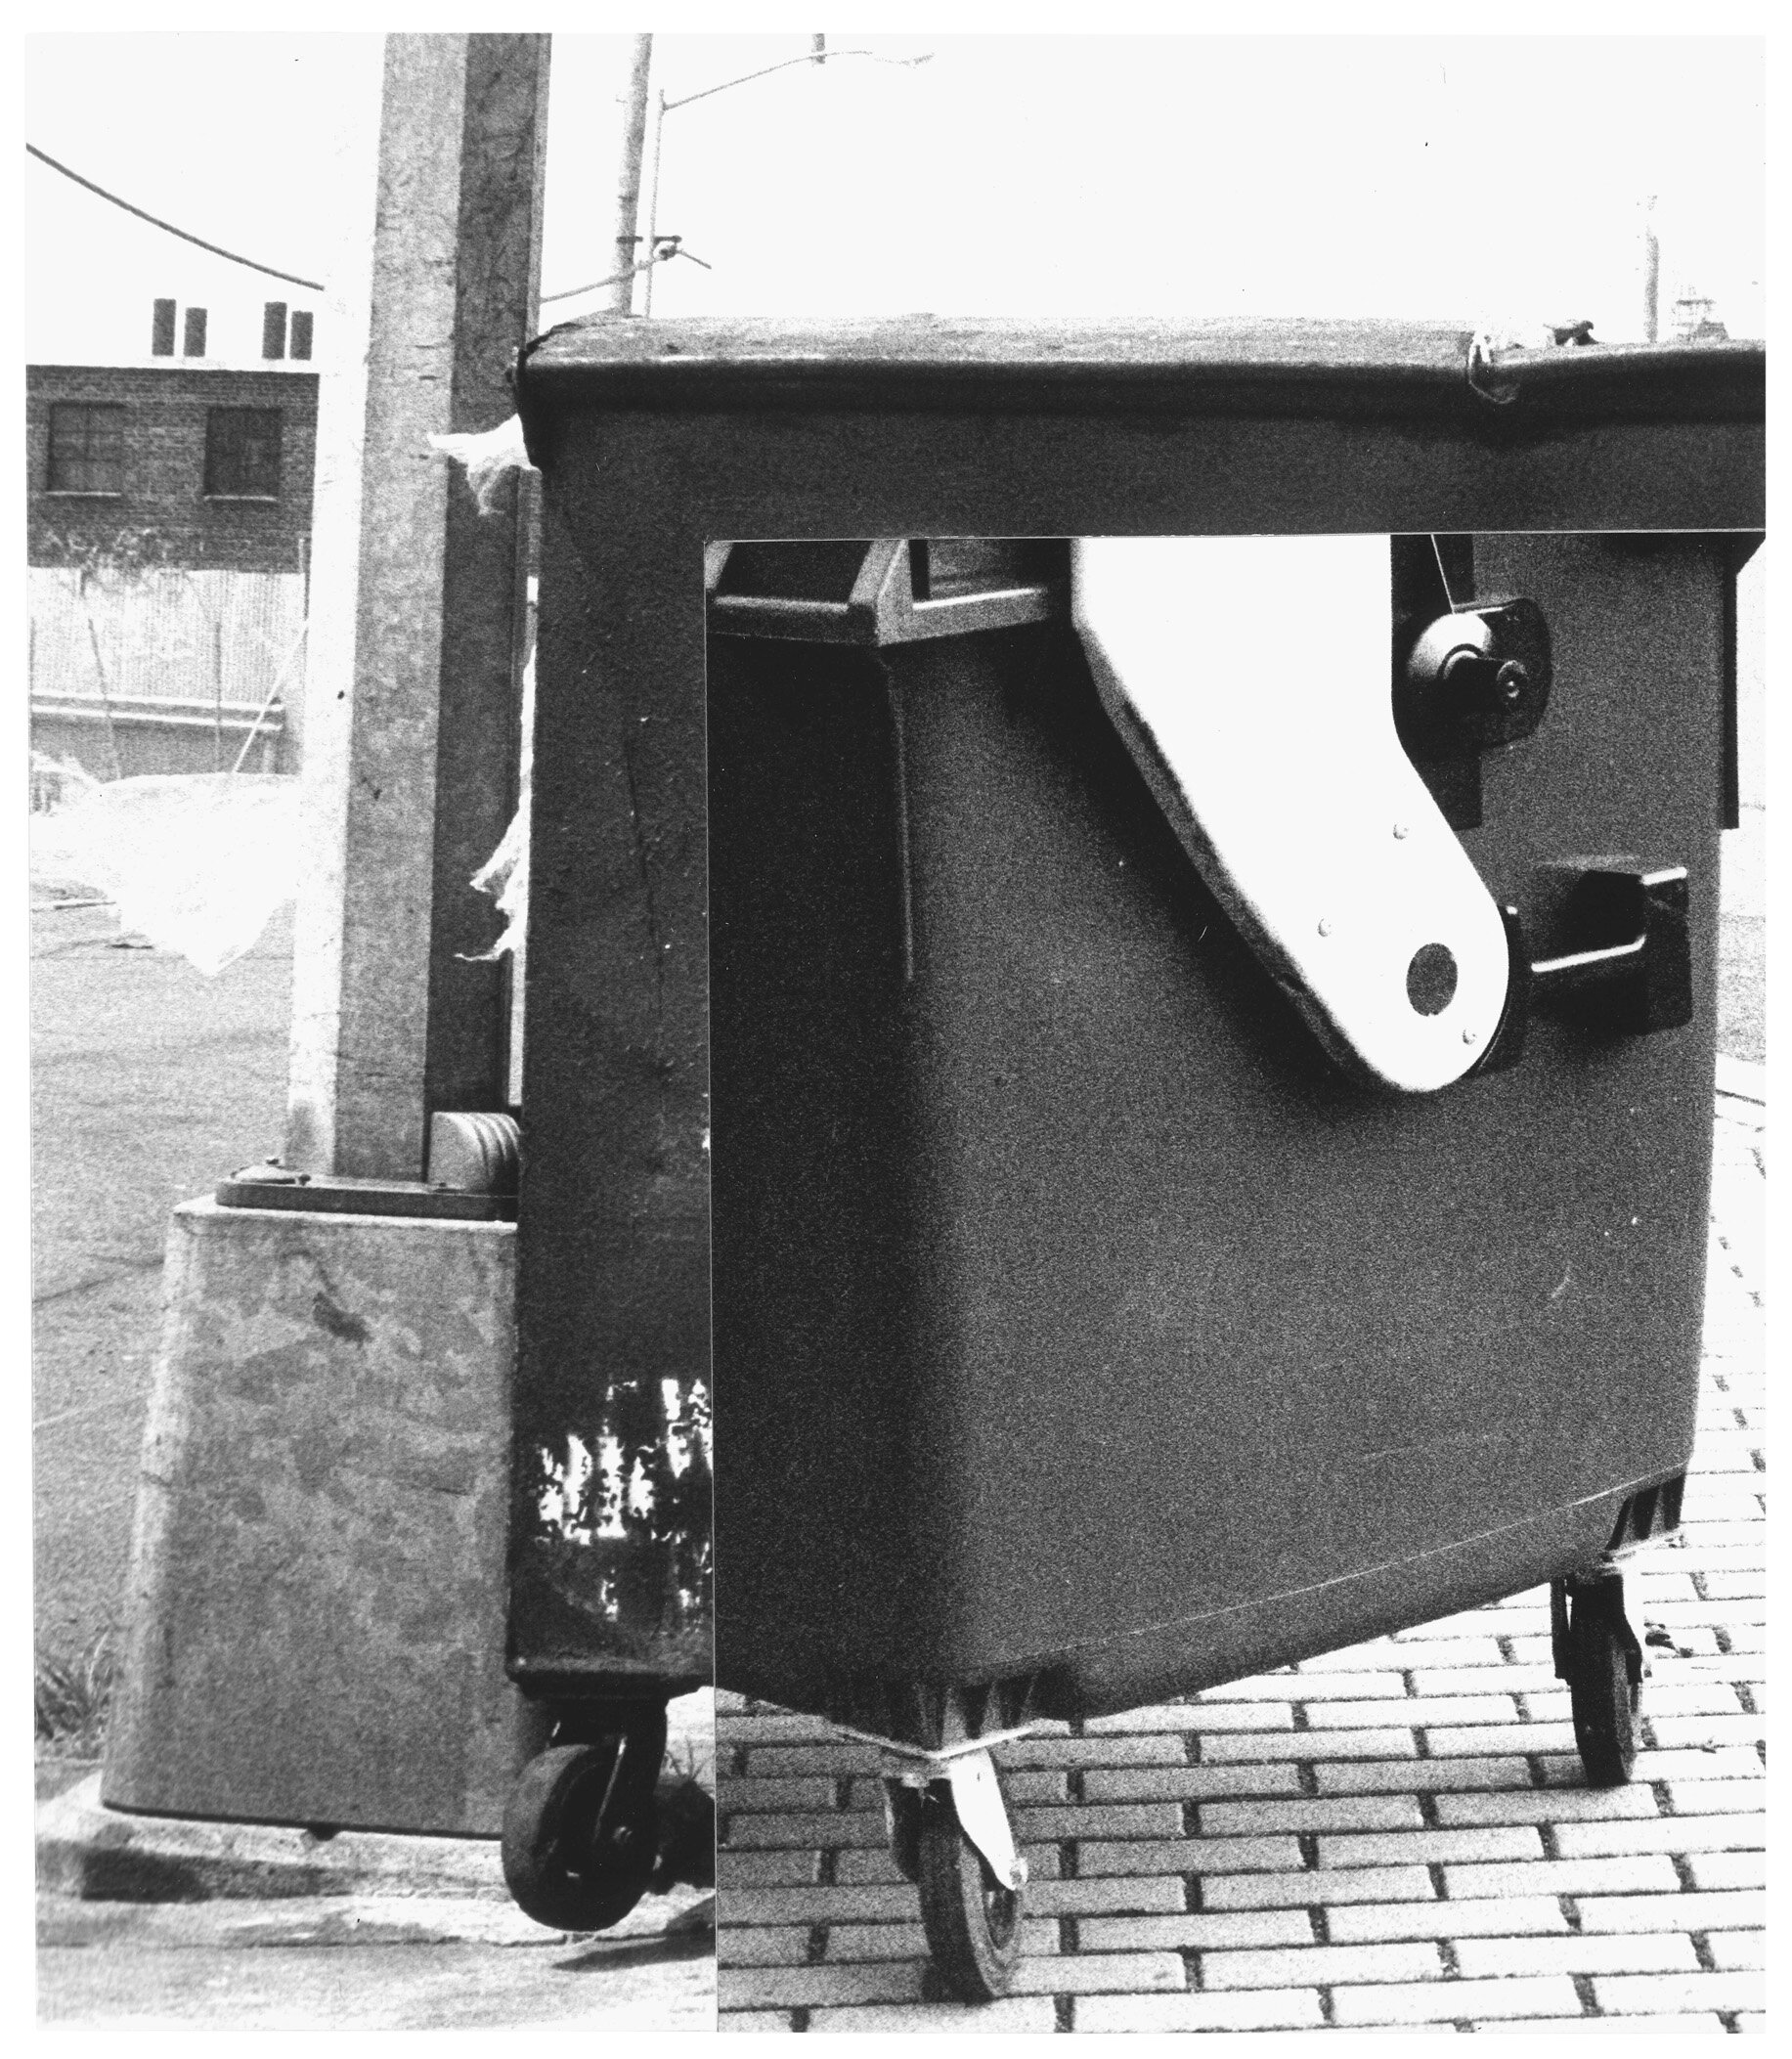  Hybrid Dumpster #53 Brooklyn, NY / Berlin, Germany 2010 13.375 inches x 11.875 inches 